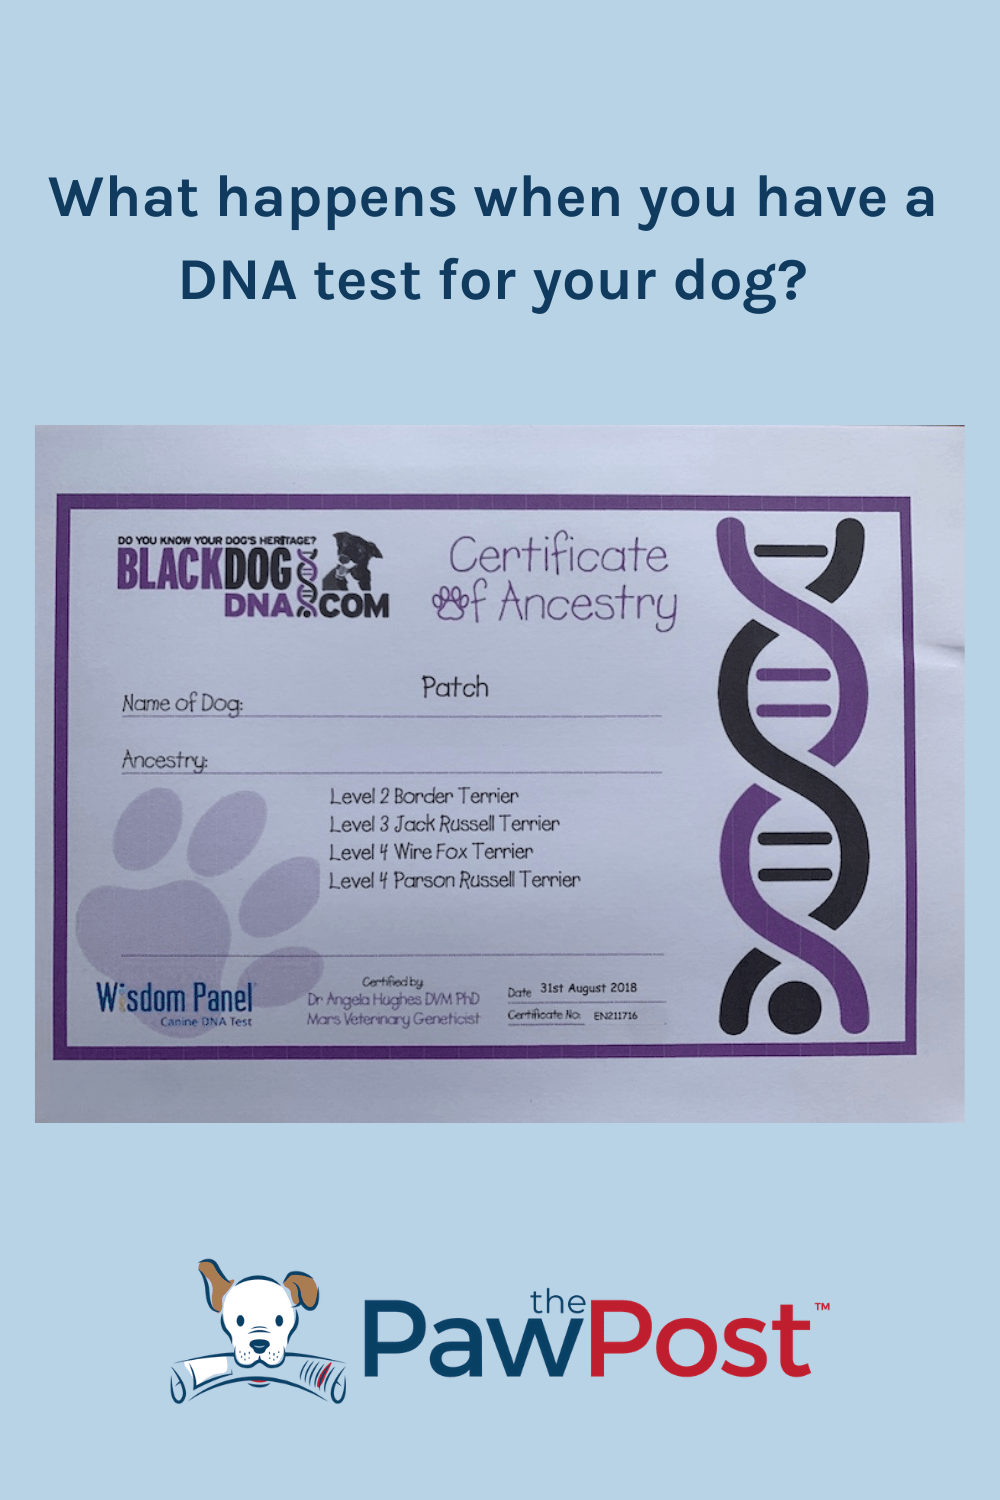 What happens when you have a DNA test for your dog